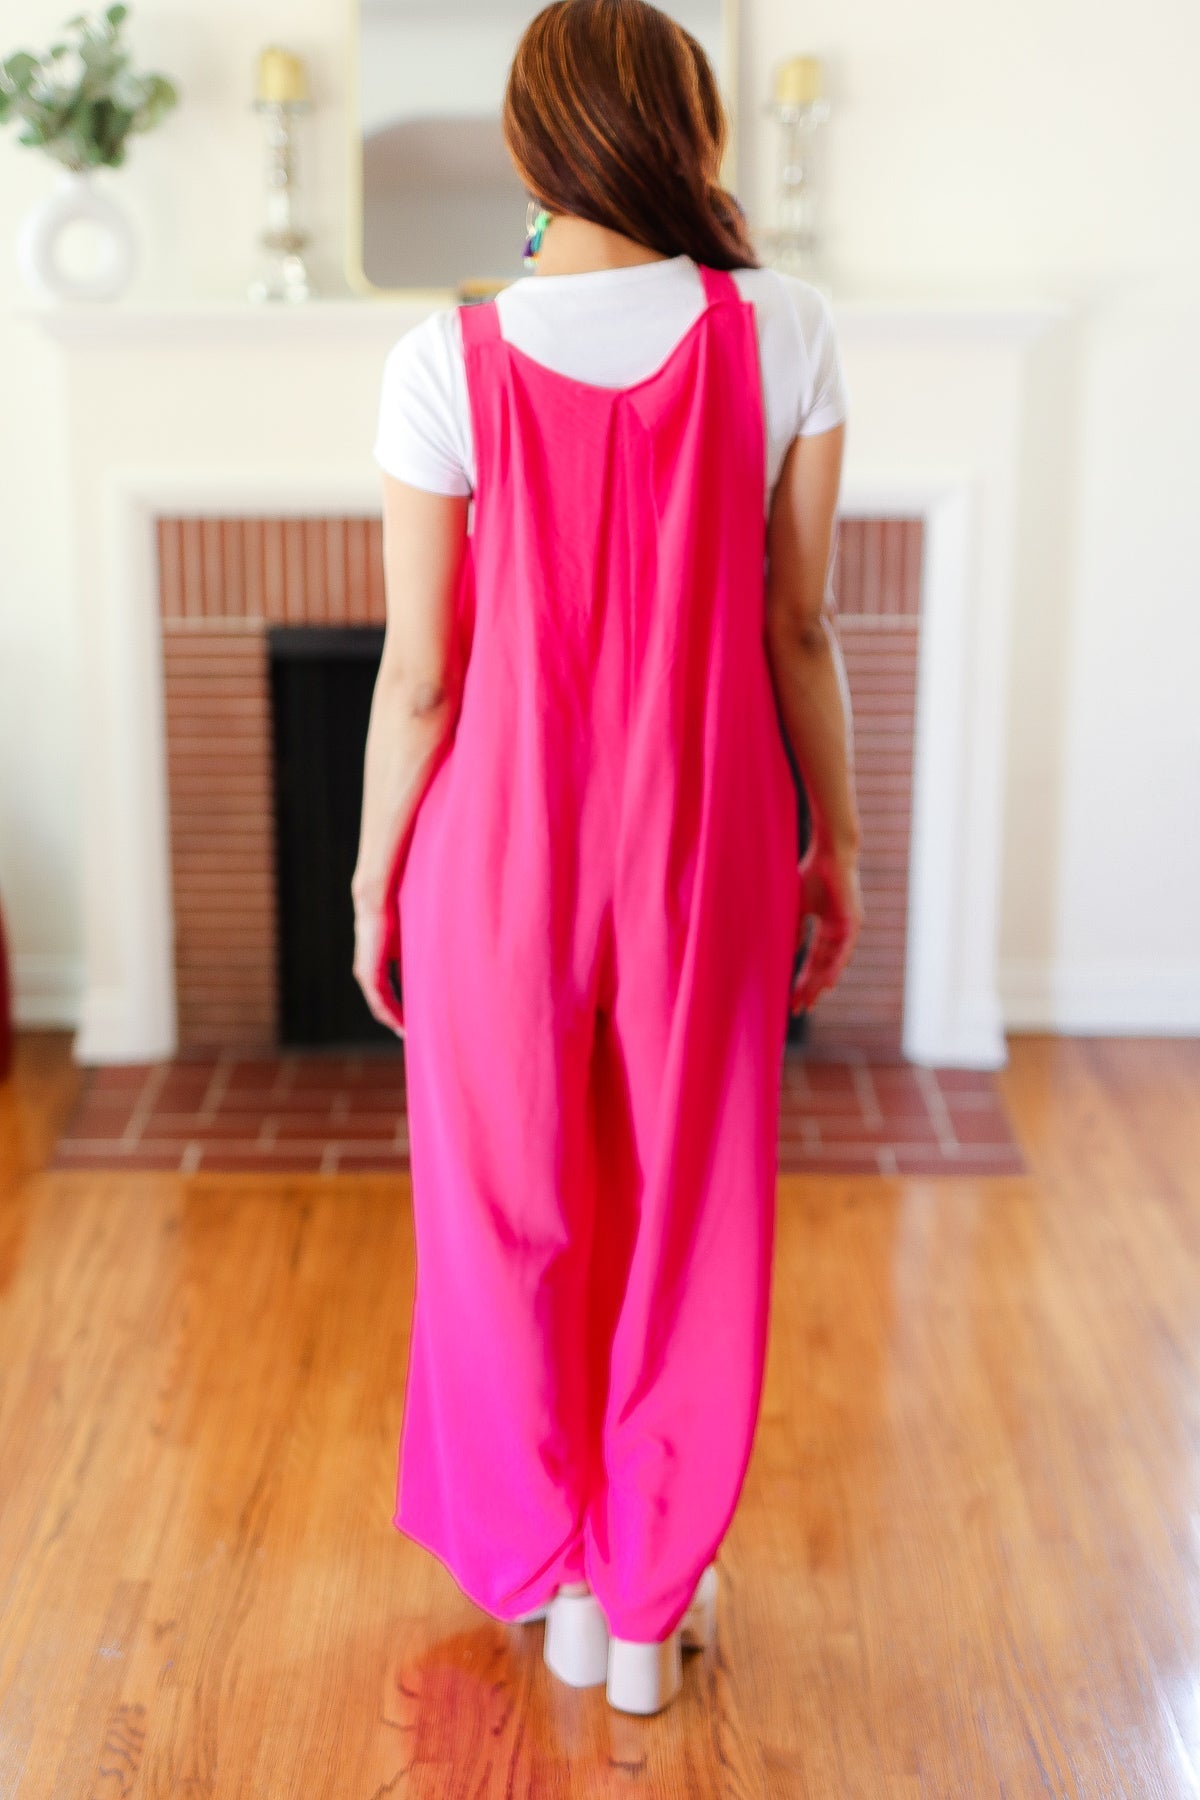 Summer Dreaming Pink Wide Leg Suspender Overall Jumpsuit (Shipping in 1-2 Weeks)